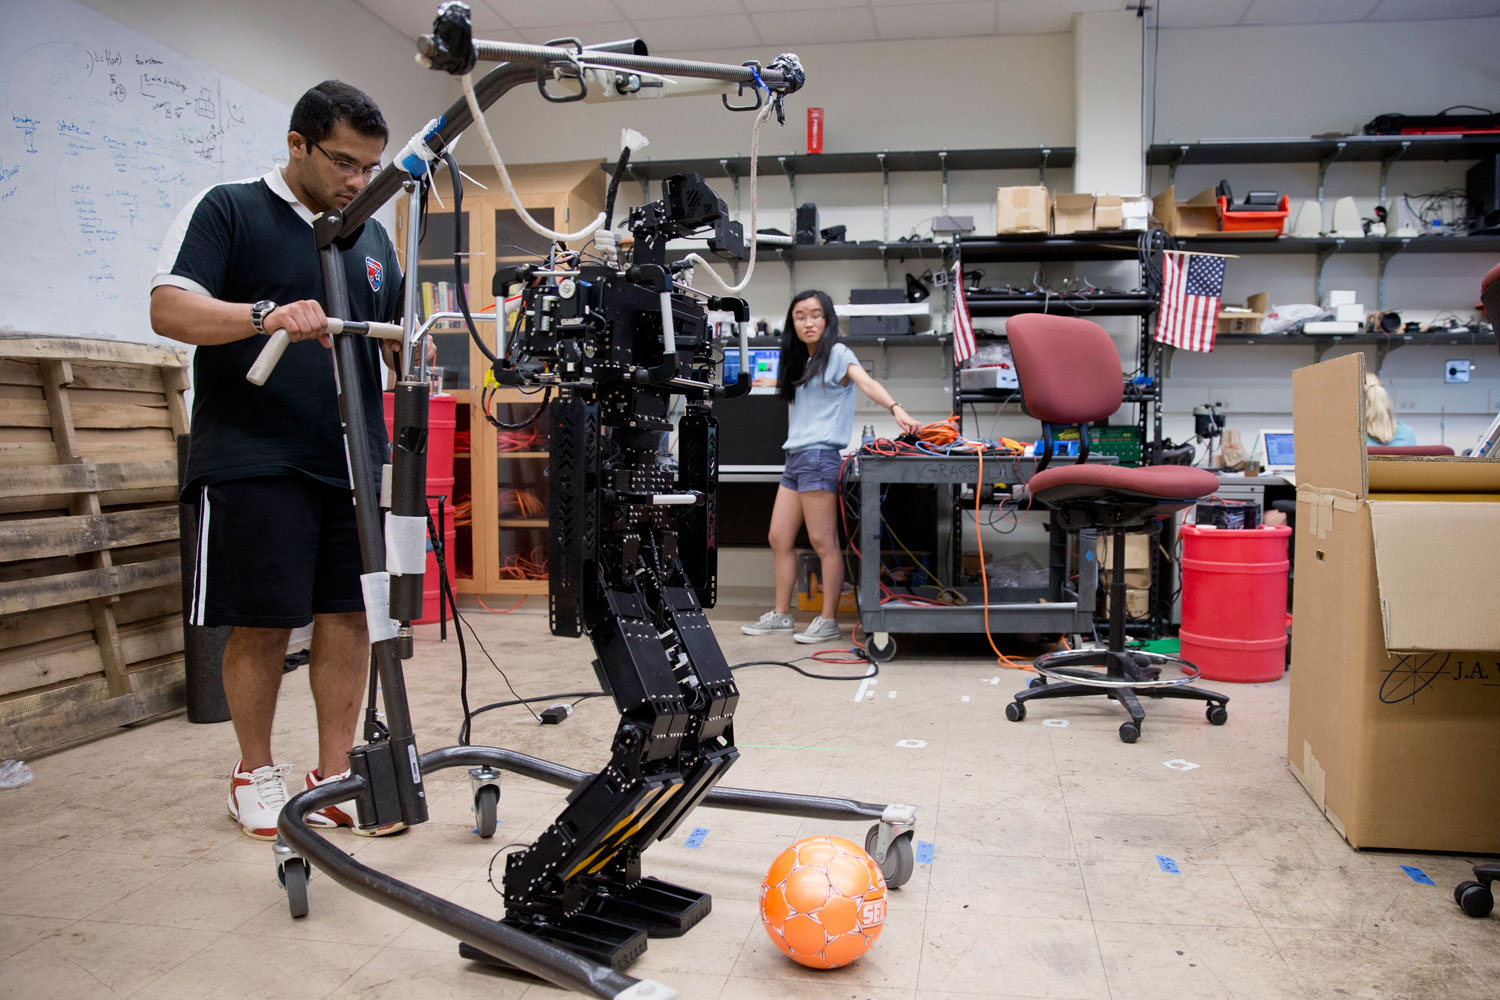 Research associates Larry Vadakedathu, left, and Qin He work with one of their RoboCup entries, a 5-foot-tall metal humanoid named THOR (Tactical Hazardous Operations Robot), in the adult-size league at the University of Pennsylvania in Philadelphia on July 7, 2014.